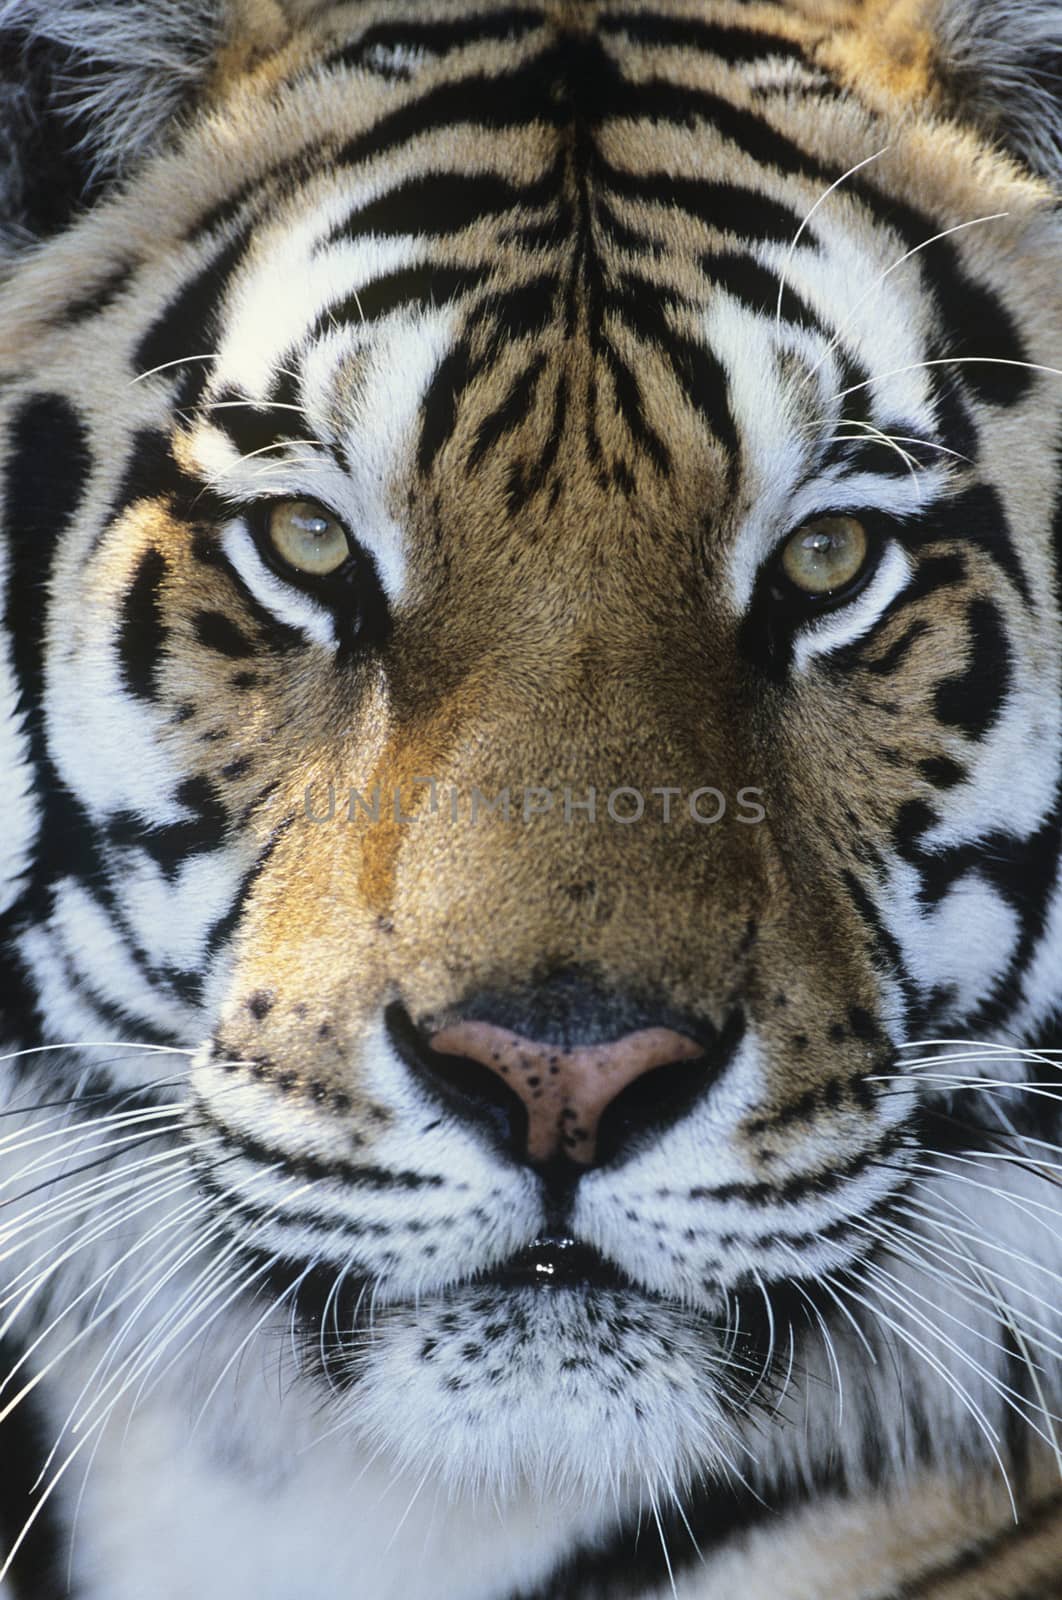 Tiger close-up of face by Jaanaaa